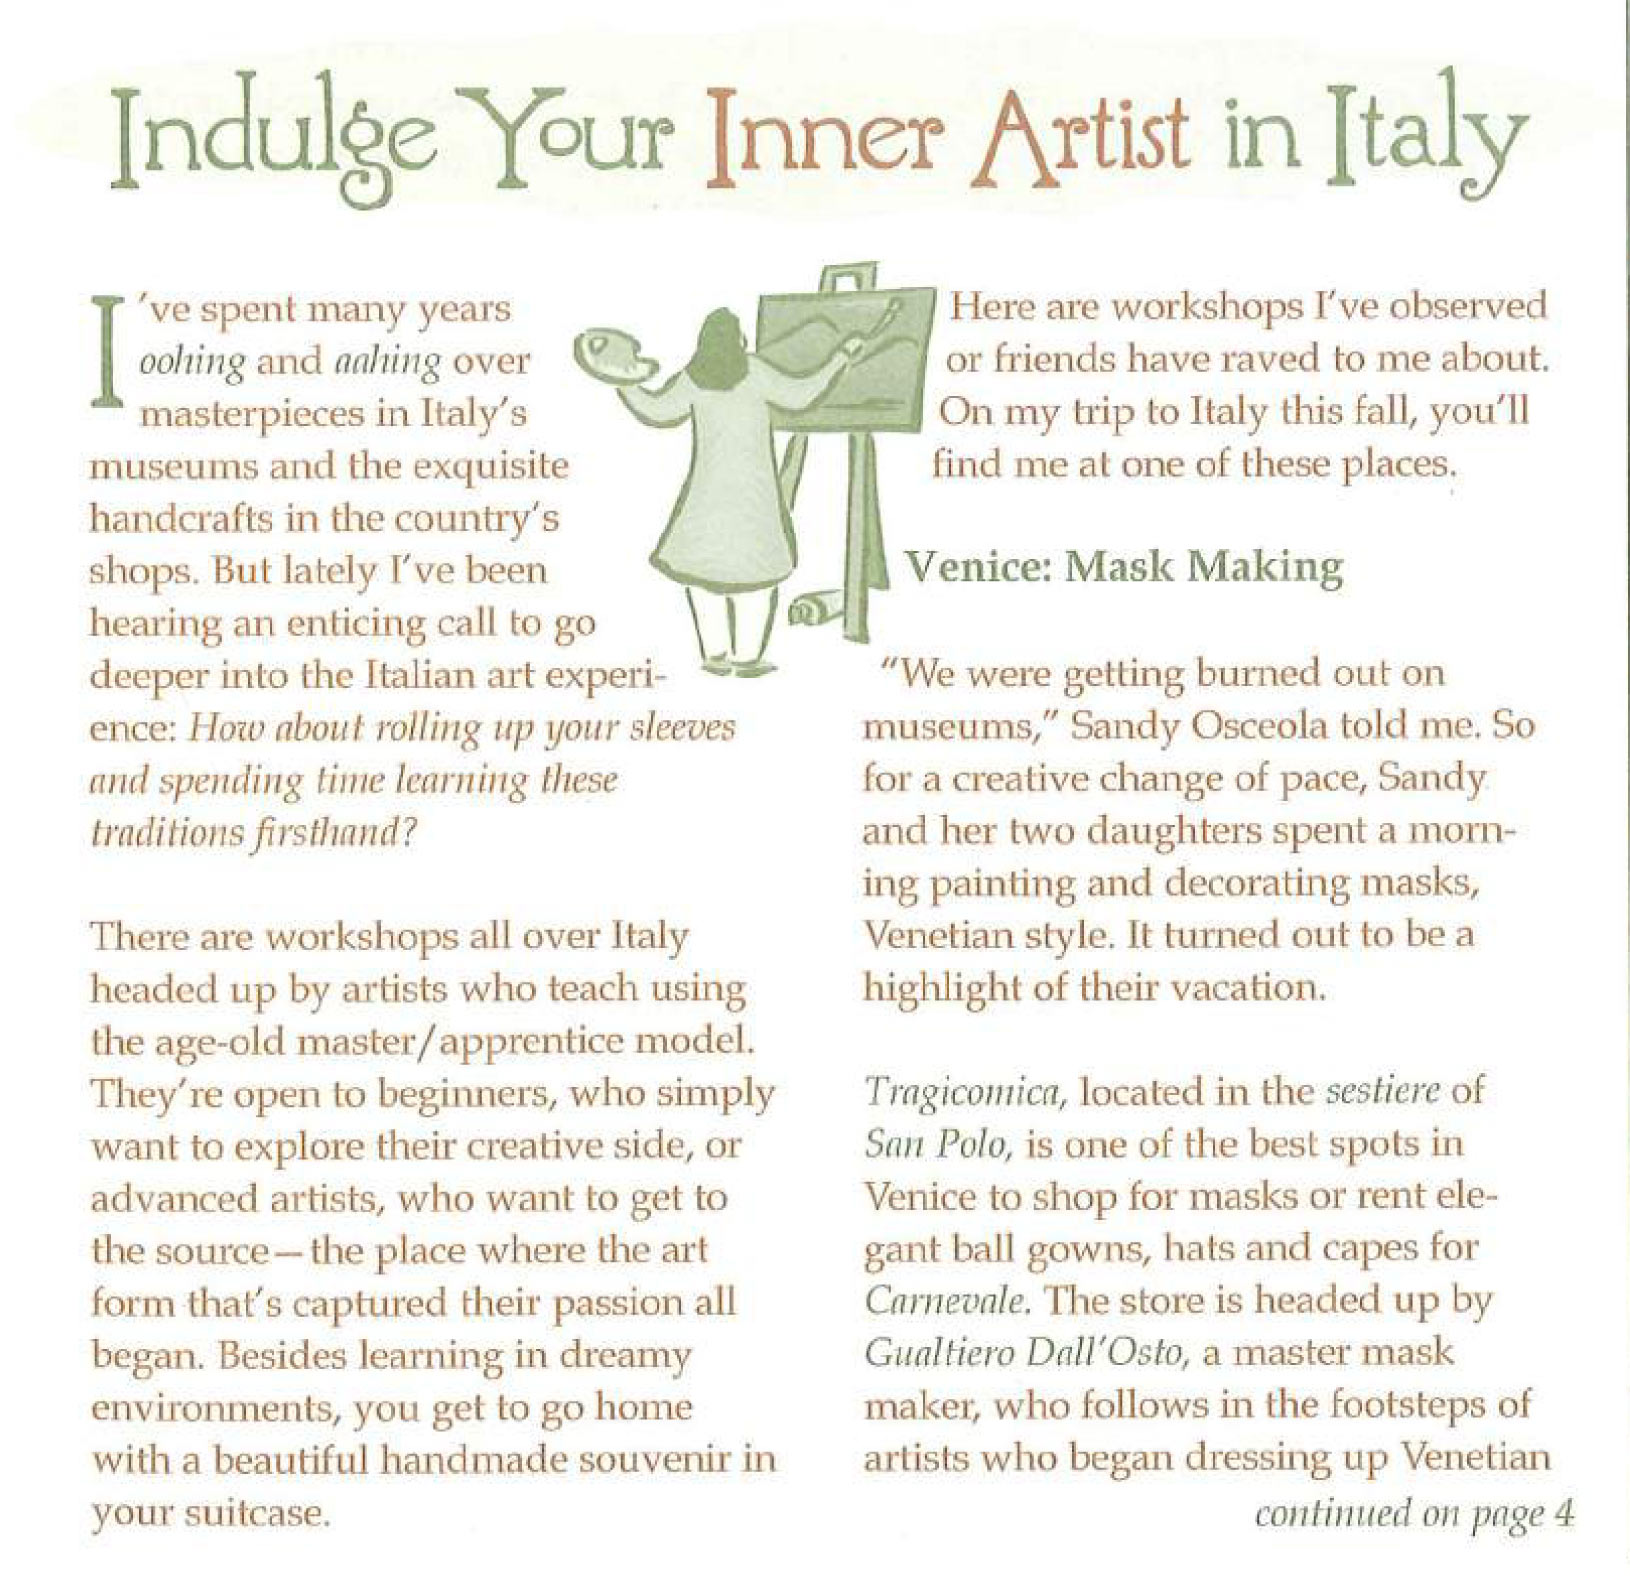 Indulge Your Inner Artist in Italy